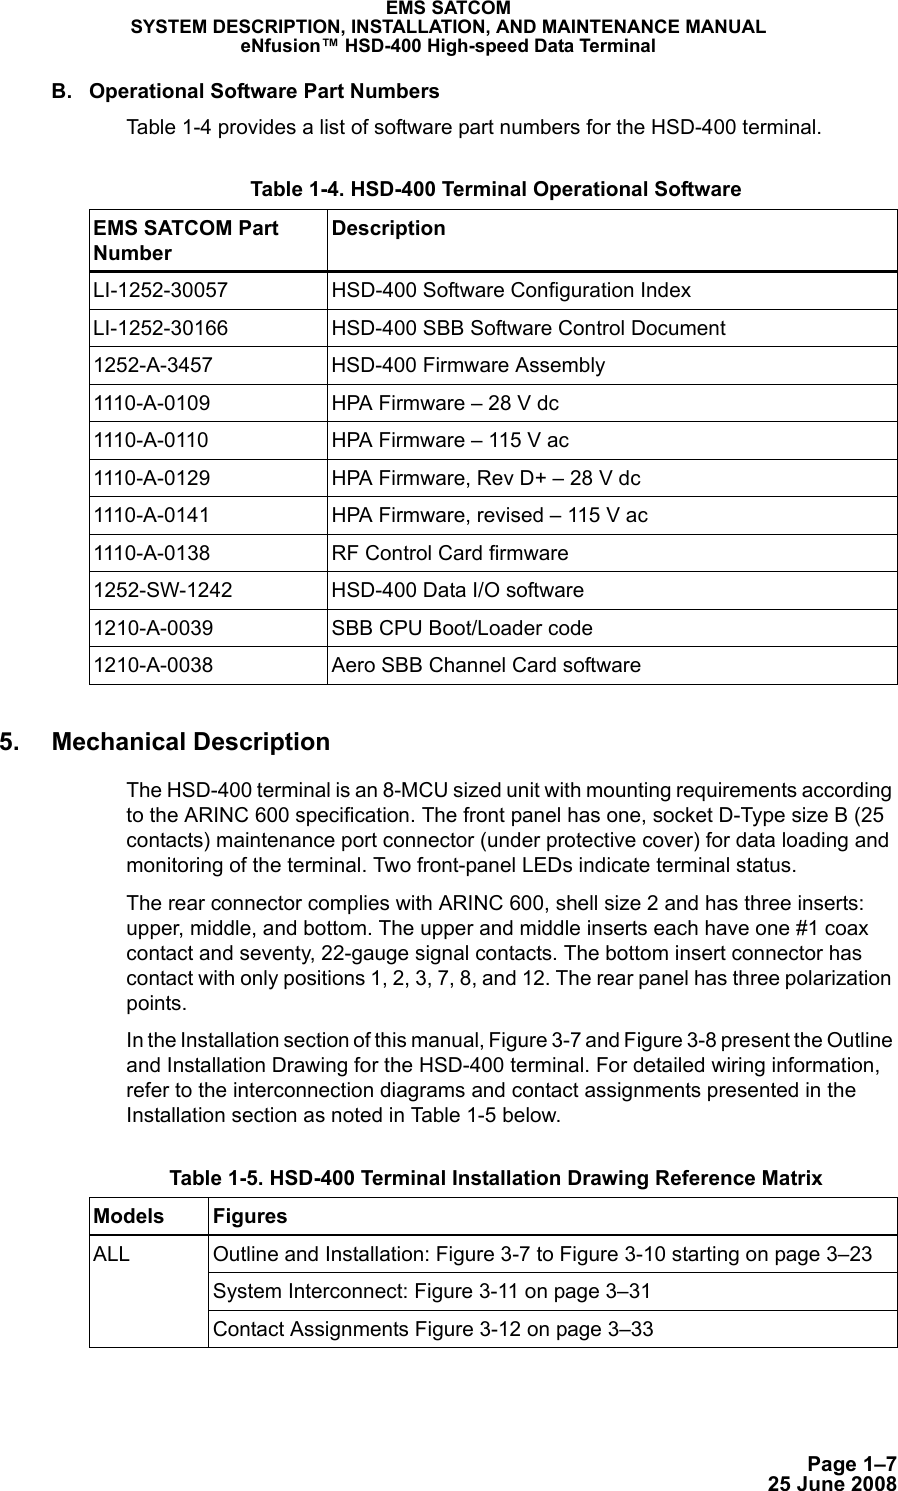 Page 1–725 June 2008EMS SATCOMSYSTEM DESCRIPTION, INSTALLATION, AND MAINTENANCE MANUALeNfusion™ HSD-400 High-speed Data TerminalB. Operational Software Part NumbersTable 1-4 provides a list of software part numbers for the HSD-400 terminal. 5. Mechanical DescriptionThe HSD-400 terminal is an 8-MCU sized unit with mounting requirements according to the ARINC 600 specification. The front panel has one, socket D-Type size B (25 contacts) maintenance port connector (under protective cover) for data loading and monitoring of the terminal. Two front-panel LEDs indicate terminal status. The rear connector complies with ARINC 600, shell size 2 and has three inserts: upper, middle, and bottom. The upper and middle inserts each have one #1 coax contact and seventy, 22-gauge signal contacts. The bottom insert connector has contact with only positions 1, 2, 3, 7, 8, and 12. The rear panel has three polarization points. In the Installation section of this manual, Figure 3-7 and Figure 3-8 present the Outline and Installation Drawing for the HSD-400 terminal. For detailed wiring information, refer to the interconnection diagrams and contact assignments presented in the Installation section as noted in Table 1-5 below. Table 1-4. HSD-400 Terminal Operational Software EMS SATCOM Part NumberDescriptionLI-1252-30057 HSD-400 Software Configuration IndexLI-1252-30166 HSD-400 SBB Software Control Document1252-A-3457 HSD-400 Firmware Assembly1110-A-0109 HPA Firmware – 28 V dc1110-A-0110 HPA Firmware – 115 V ac1110-A-0129 HPA Firmware, Rev D+ – 28 V dc1110-A-0141 HPA Firmware, revised – 115 V ac1110-A-0138 RF Control Card firmware1252-SW-1242 HSD-400 Data I/O software1210-A-0039 SBB CPU Boot/Loader code1210-A-0038 Aero SBB Channel Card software Table 1-5. HSD-400 Terminal Installation Drawing Reference Matrix Models FiguresALL Outline and Installation: Figure 3-7 to Figure 3-10 starting on page 3–23System Interconnect: Figure 3-11 on page 3–31Contact Assignments Figure 3-12 on page 3–33